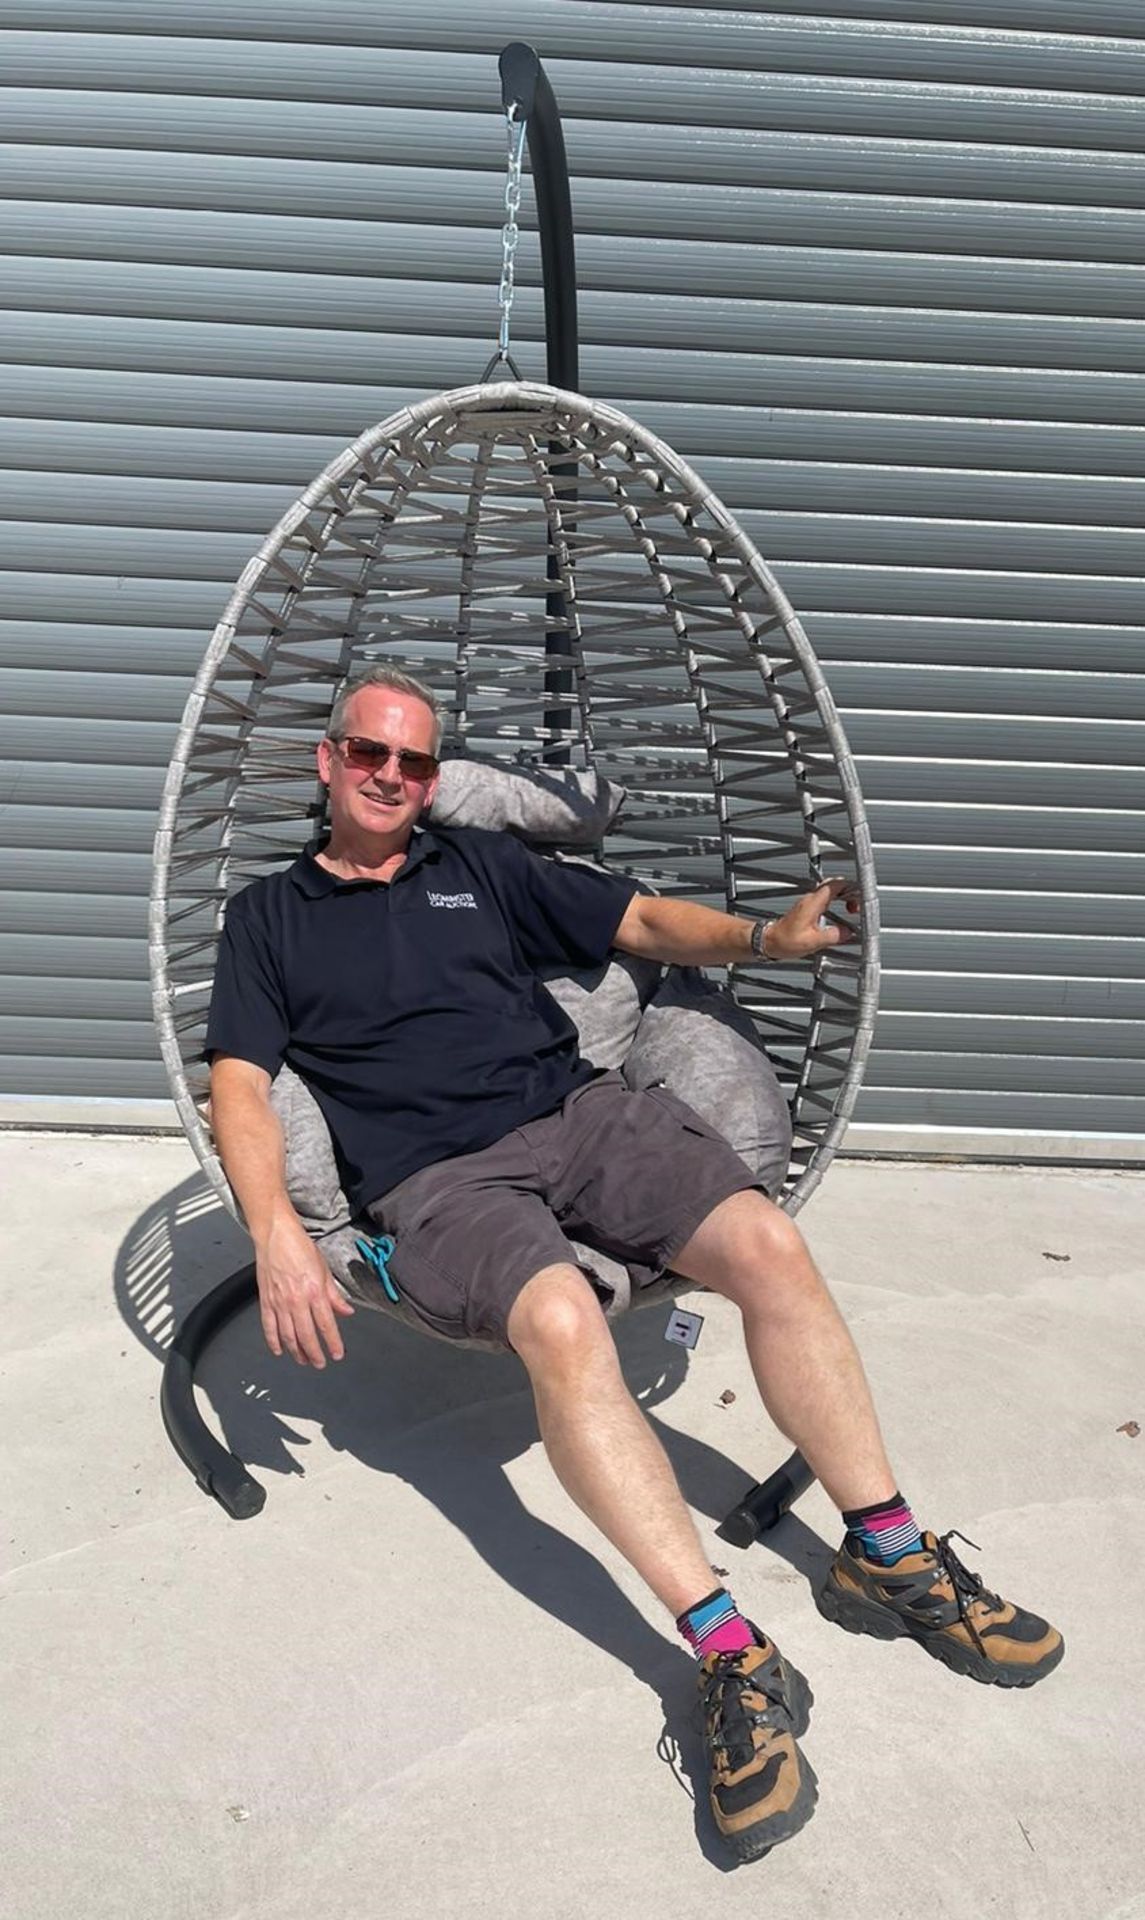 RRP Â£399 - Large Grey Woven Indoor/Outdoor Swinging Egg Chair - Our egg chair provides portable and - Image 3 of 3